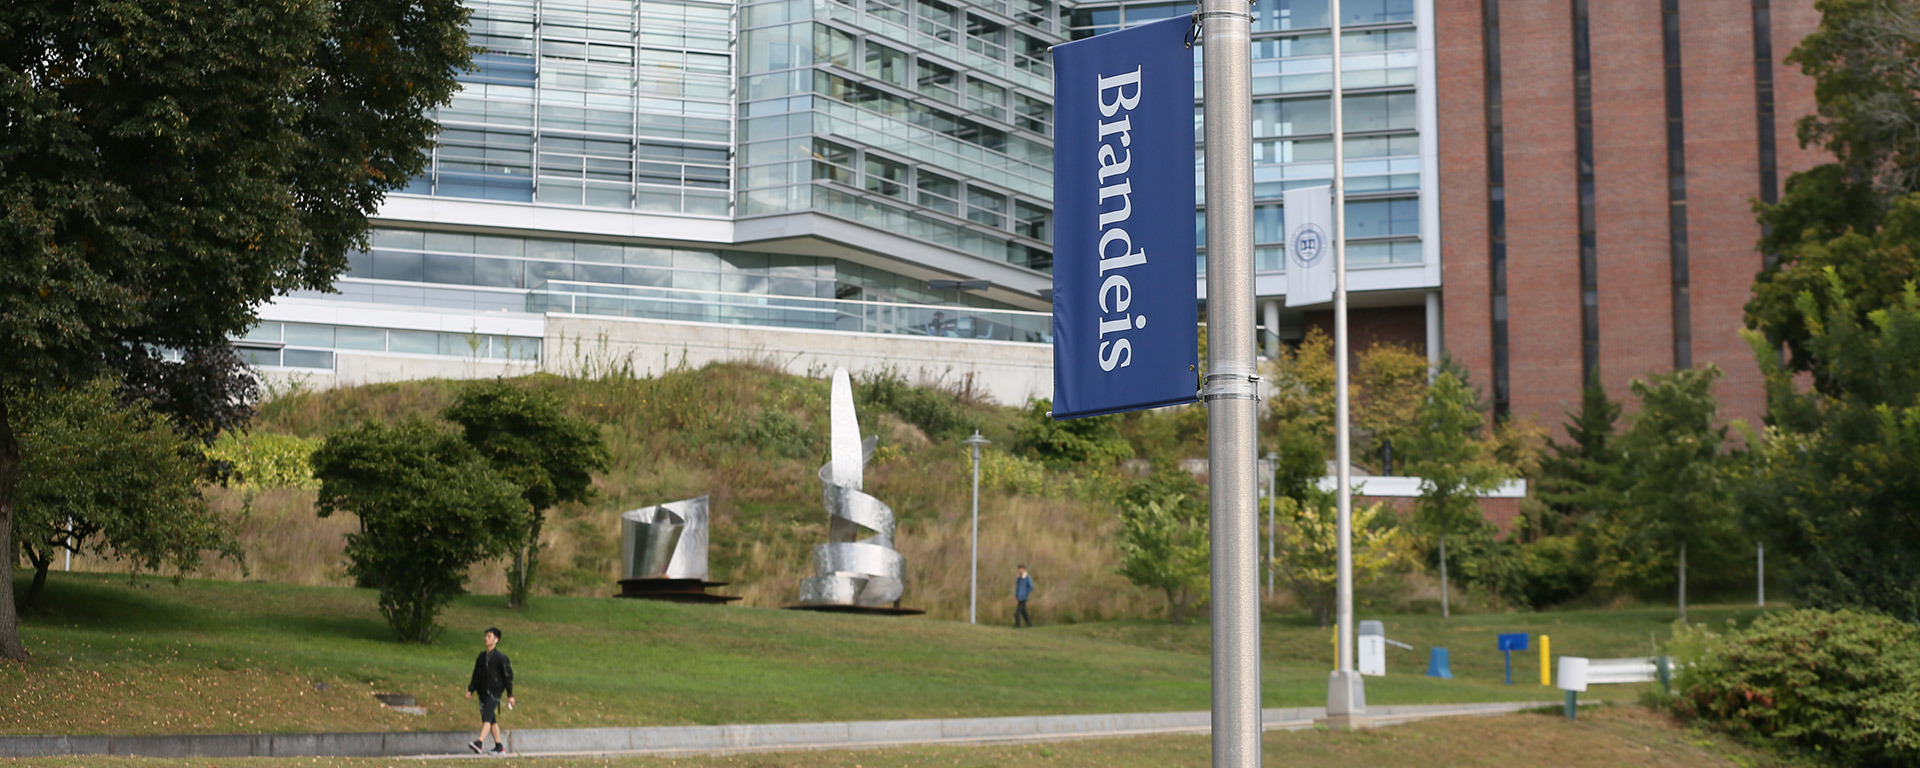 view of science center with brandeis banner prominently in foreground